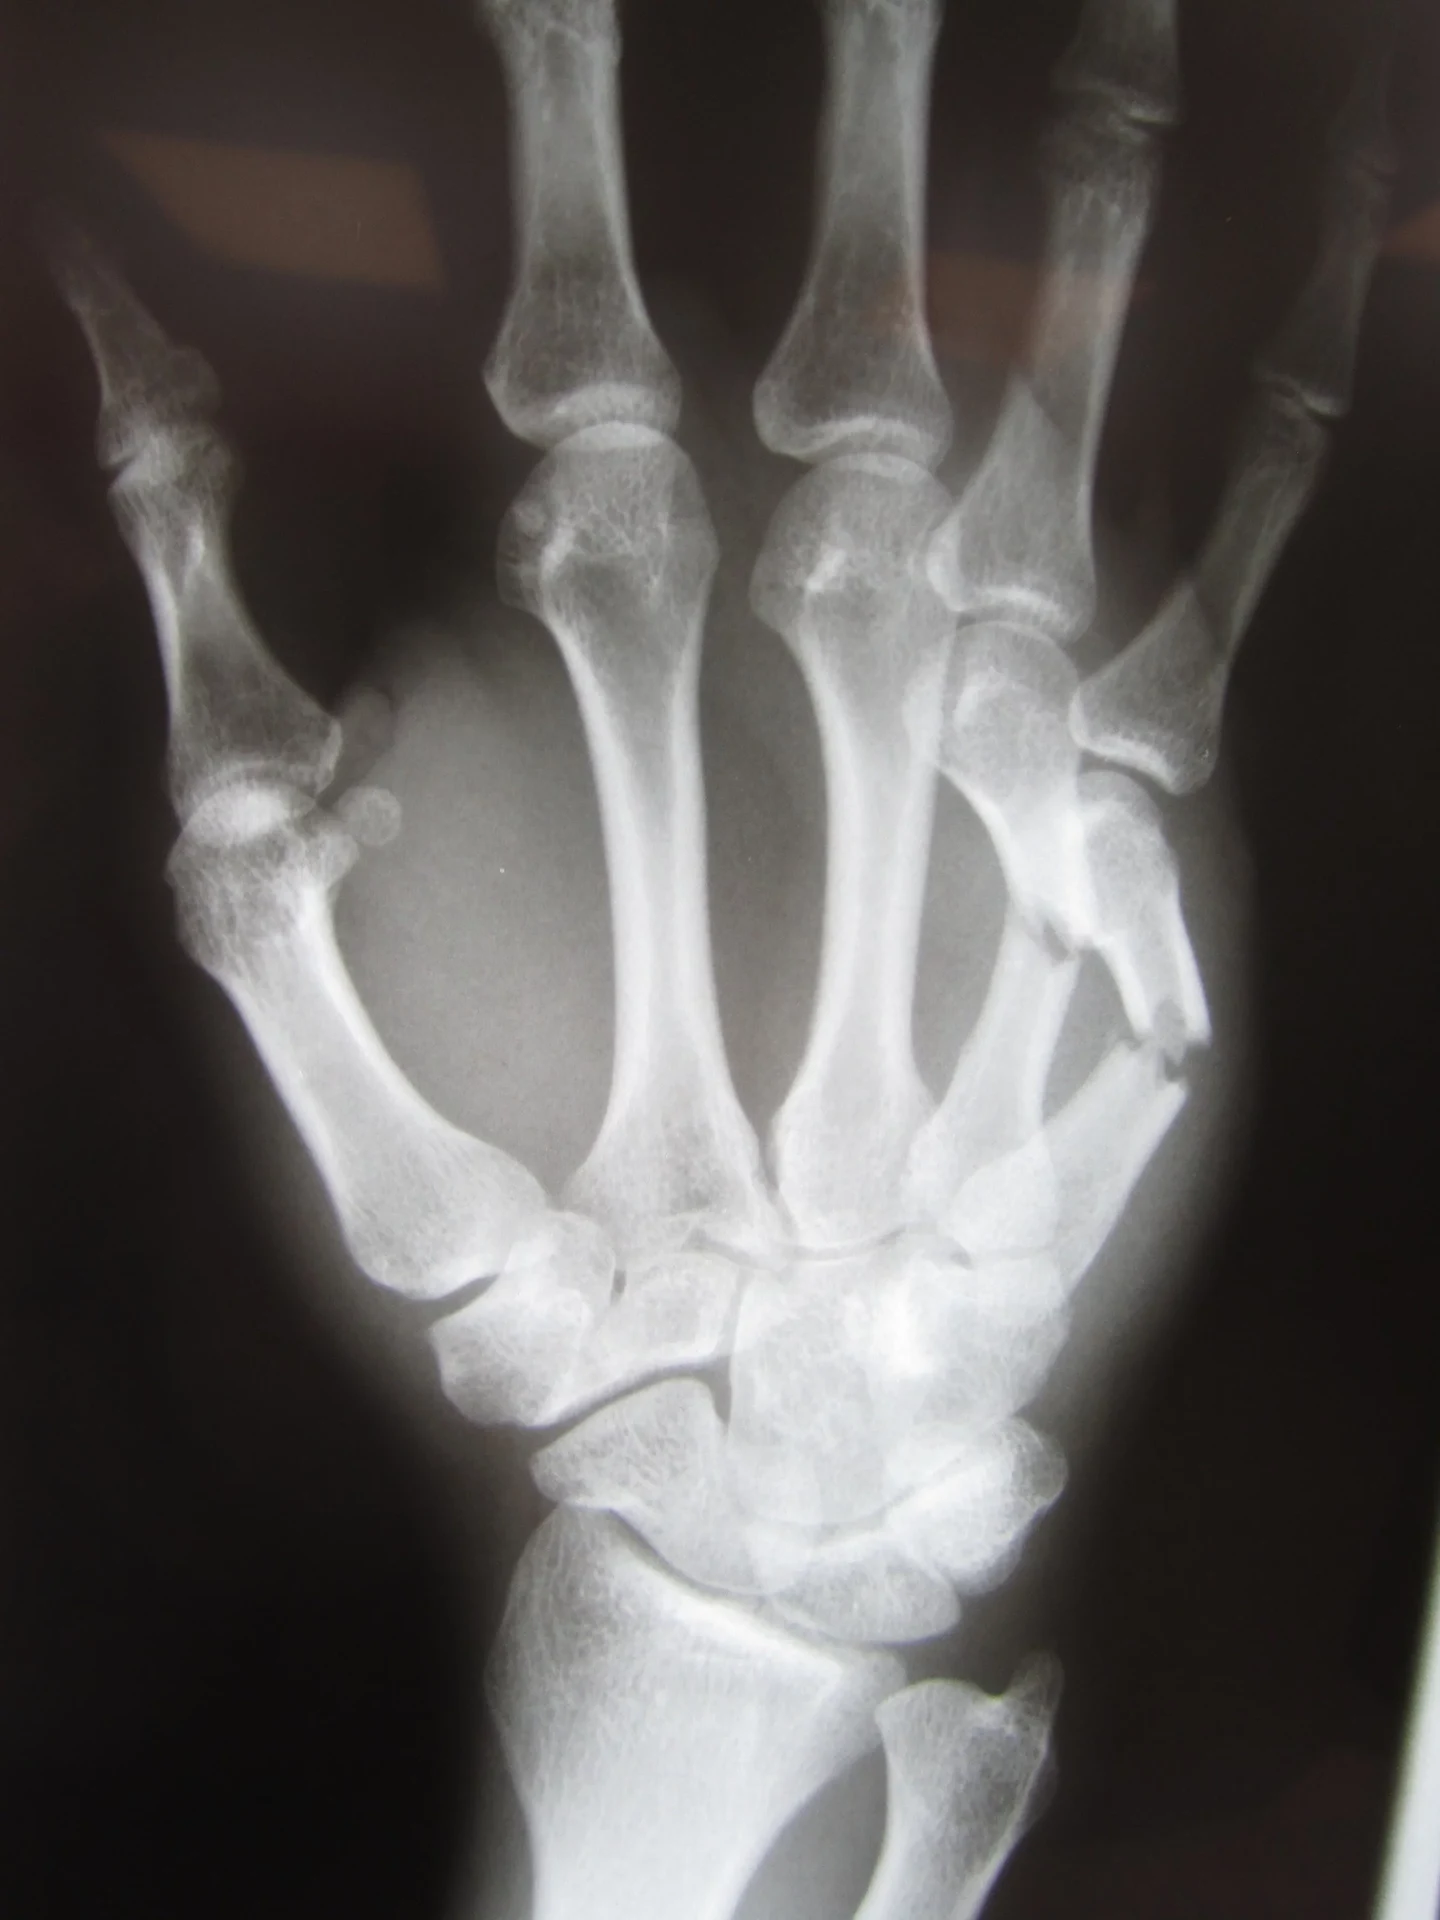 Raleigh Metacarpal fracture treatment